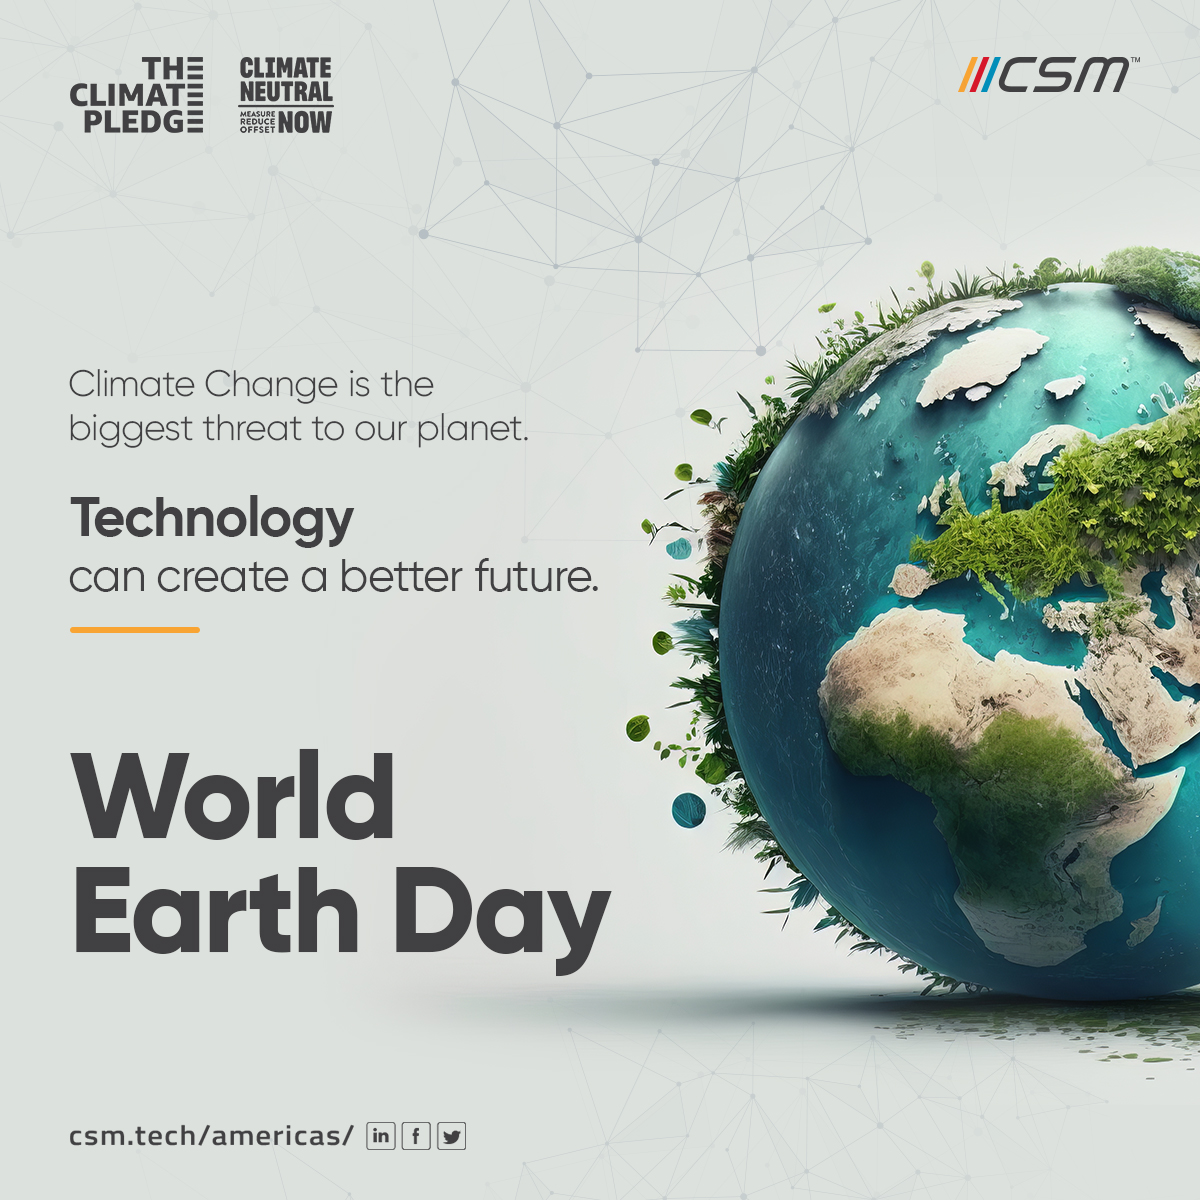 With technology, we can walk towards greener digital transformations for sustainable future. 

Because every action counts in preserving our shared home!         

#WorldEarthDay #ClimateChangeNow #UNClimateChangeNow #TheClimatePledge #GreenTechnology #USA #CSMTech